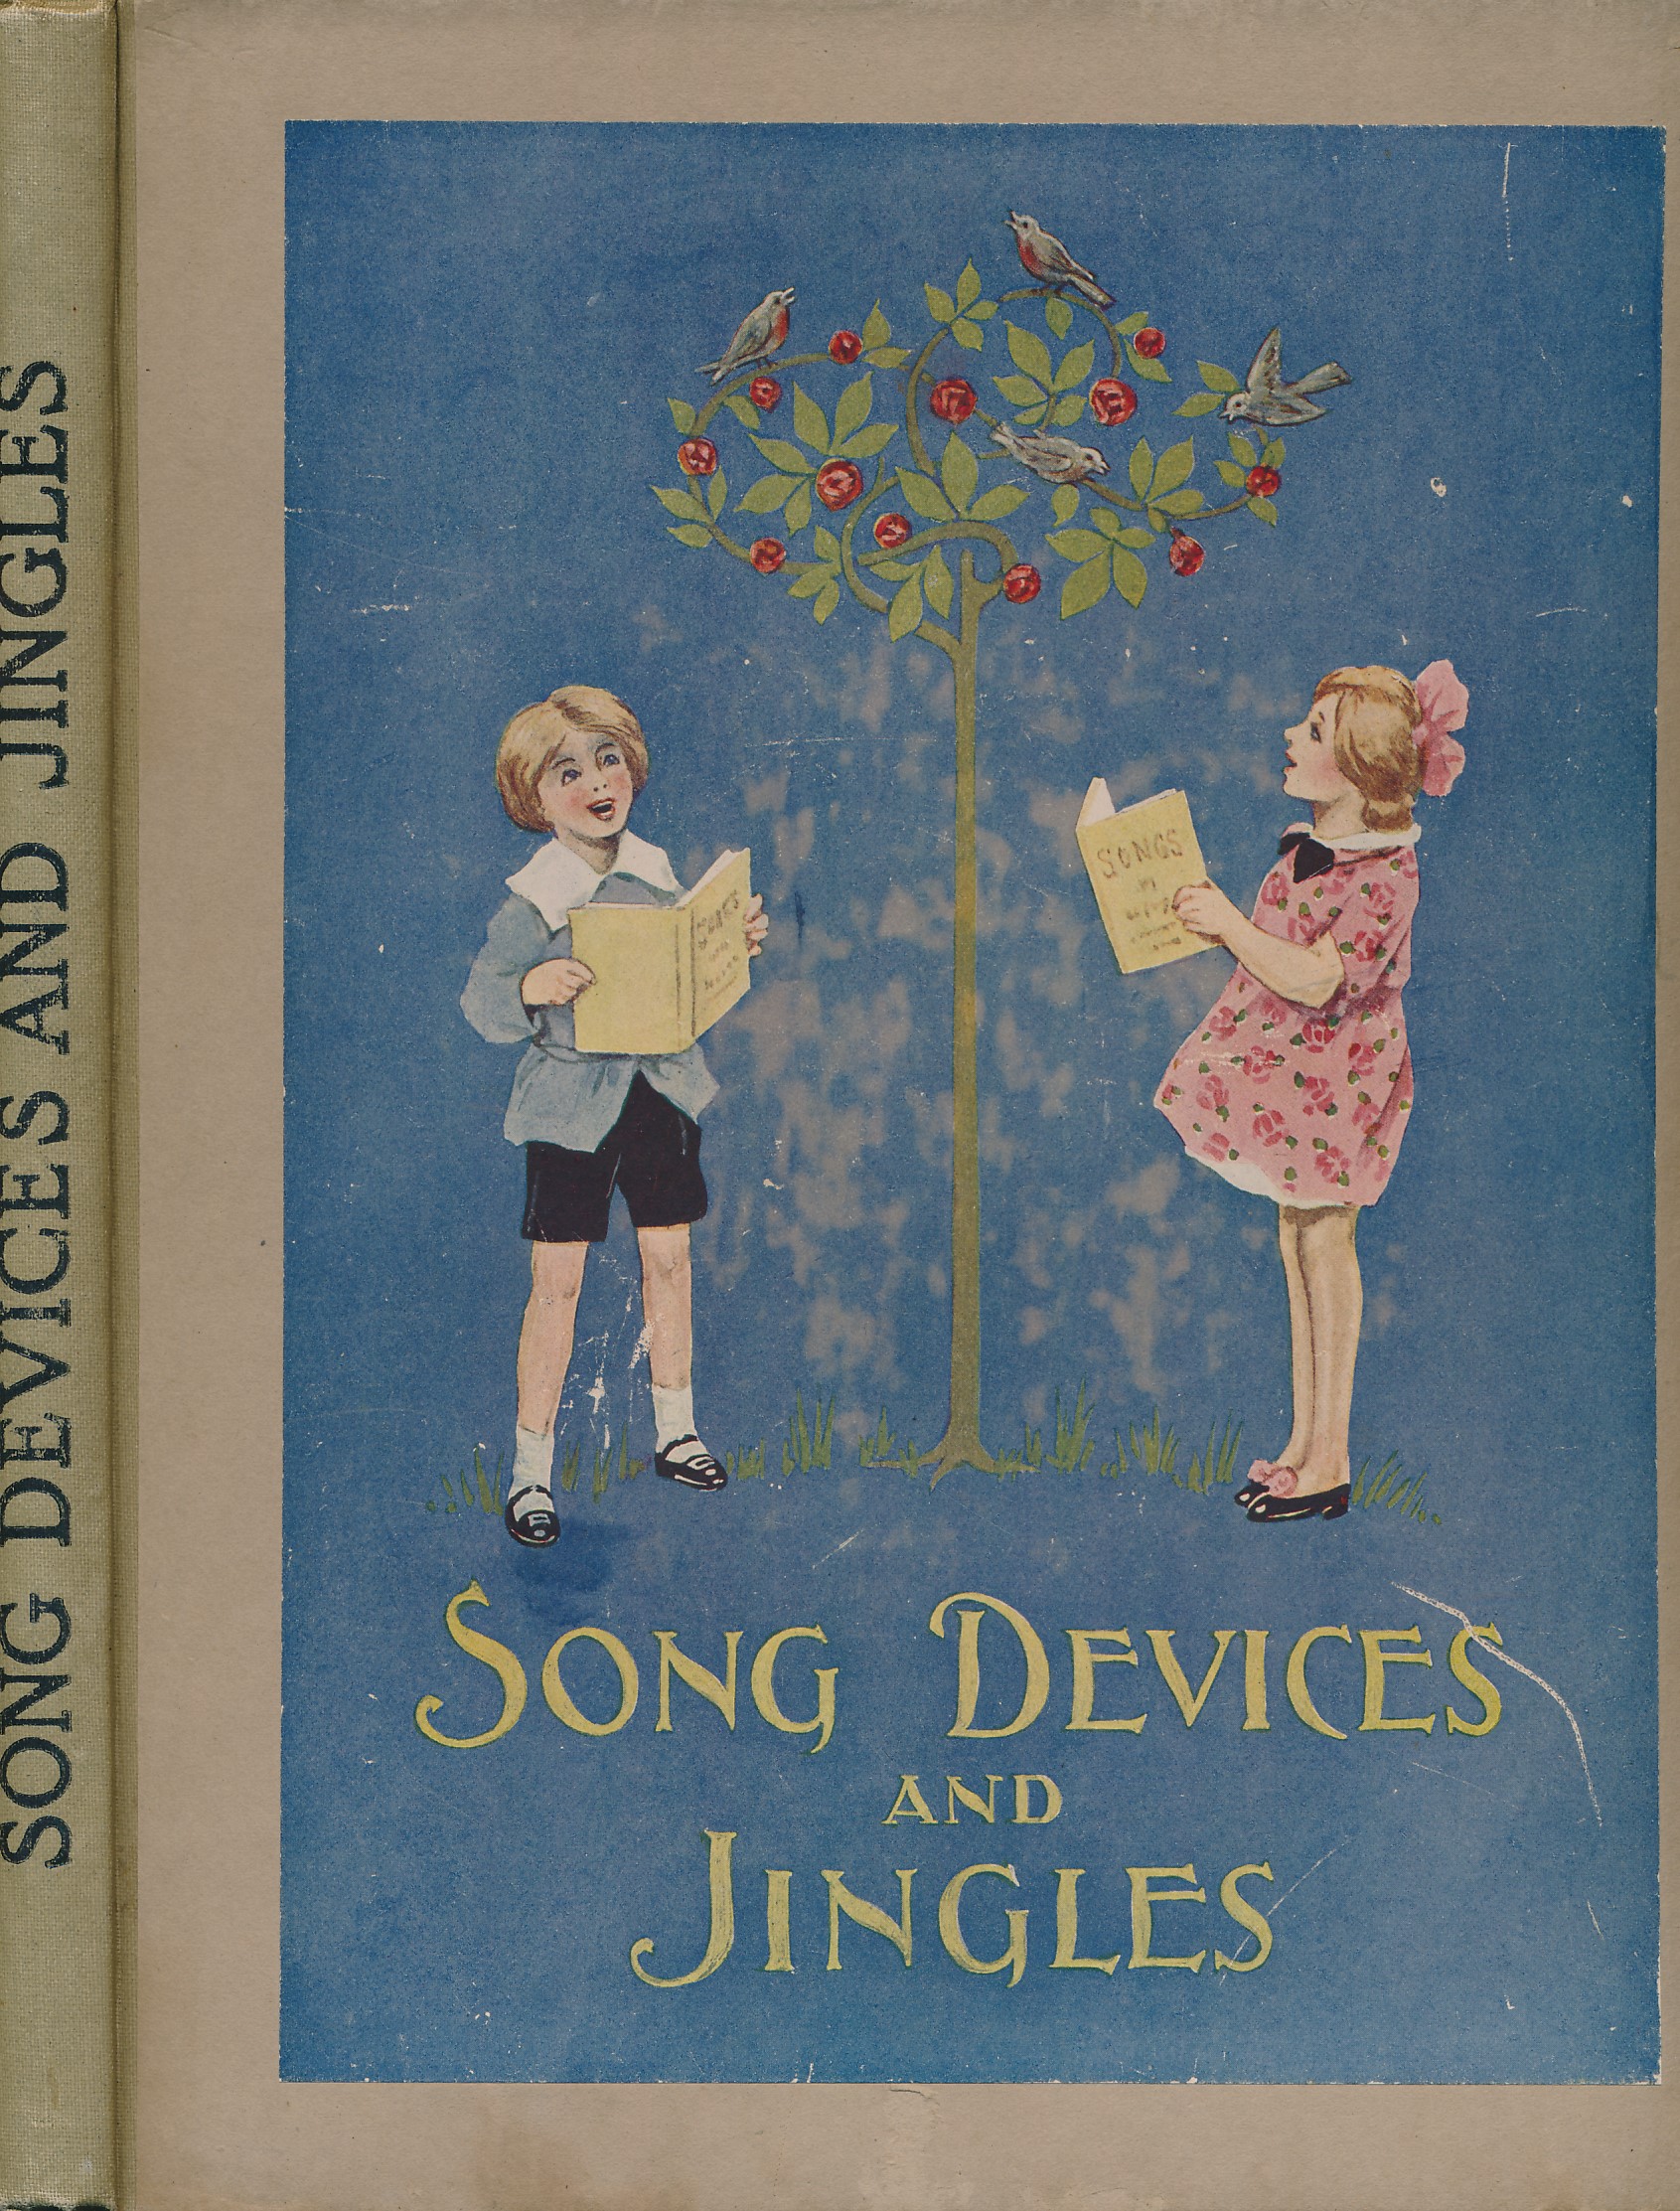 Song Devices and Jingles